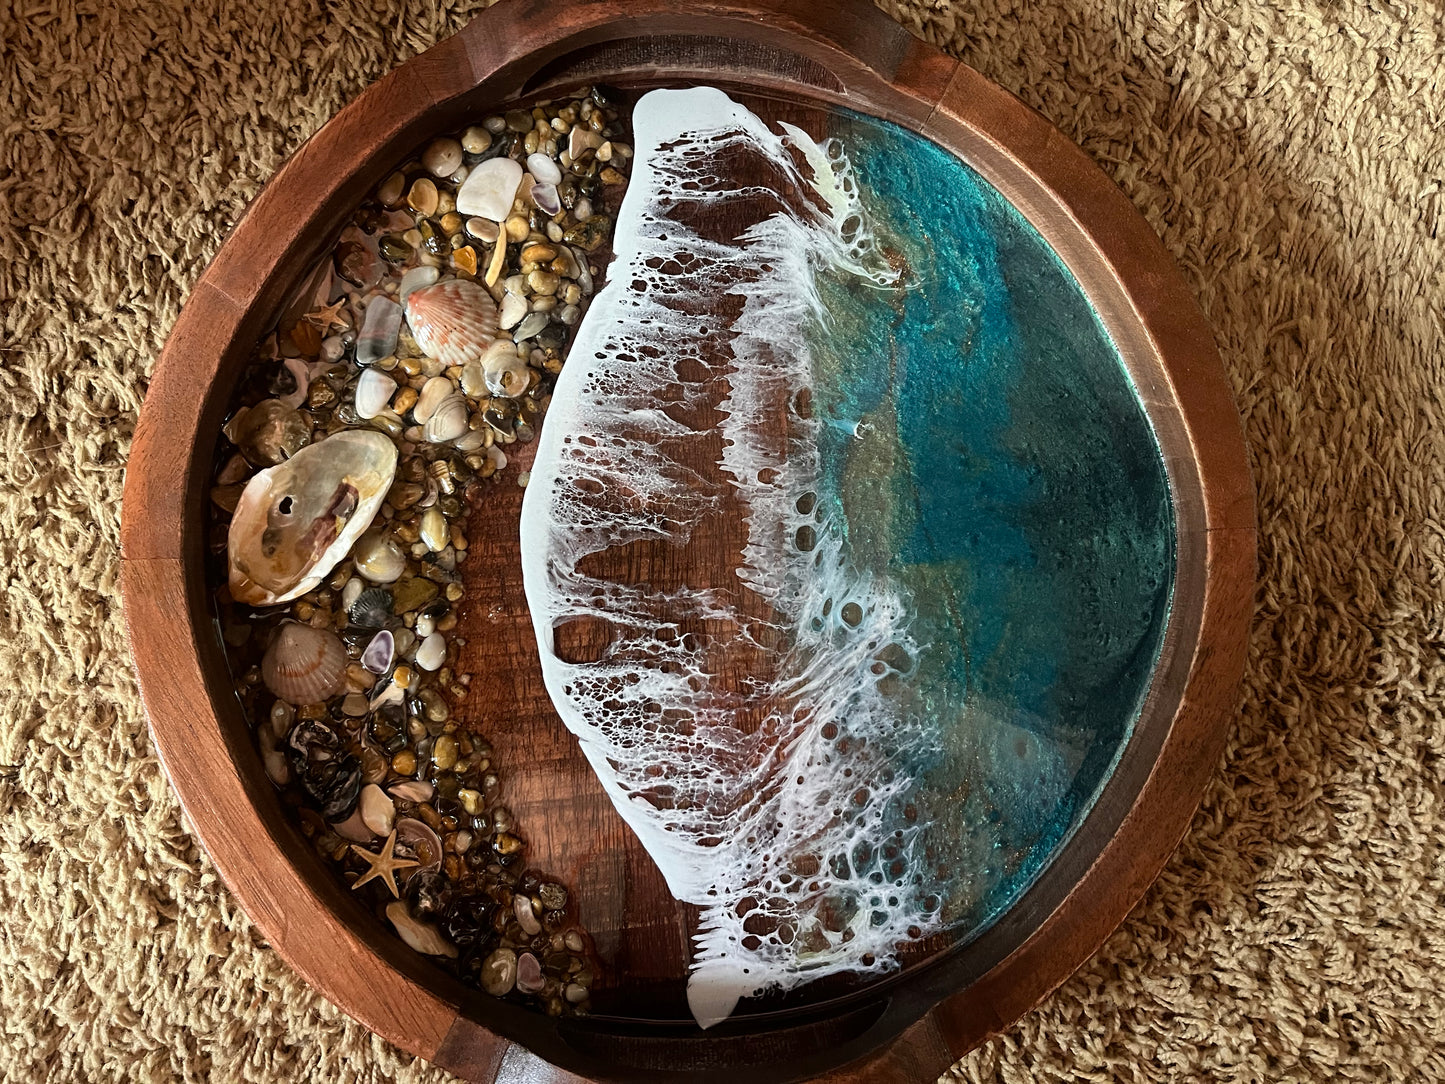 You need this gorgeous serving tray decorating your beach home. Beautifully hand crafted with resin waves memorializing the ocean crashing on the beaches of OBX.  Size is 14" Round Wood Tray with Handles.  Adorned with Ocean Resin Waves and Sea Shell Collected from the beaches of the Outer Banks. Serving Tray has Teal Blue Waves with Real Outer Banks Sea Shells. Hand made by Fyre Art Studio, an OBX Resin Artist located in Kill Devil Hills North Carolina.